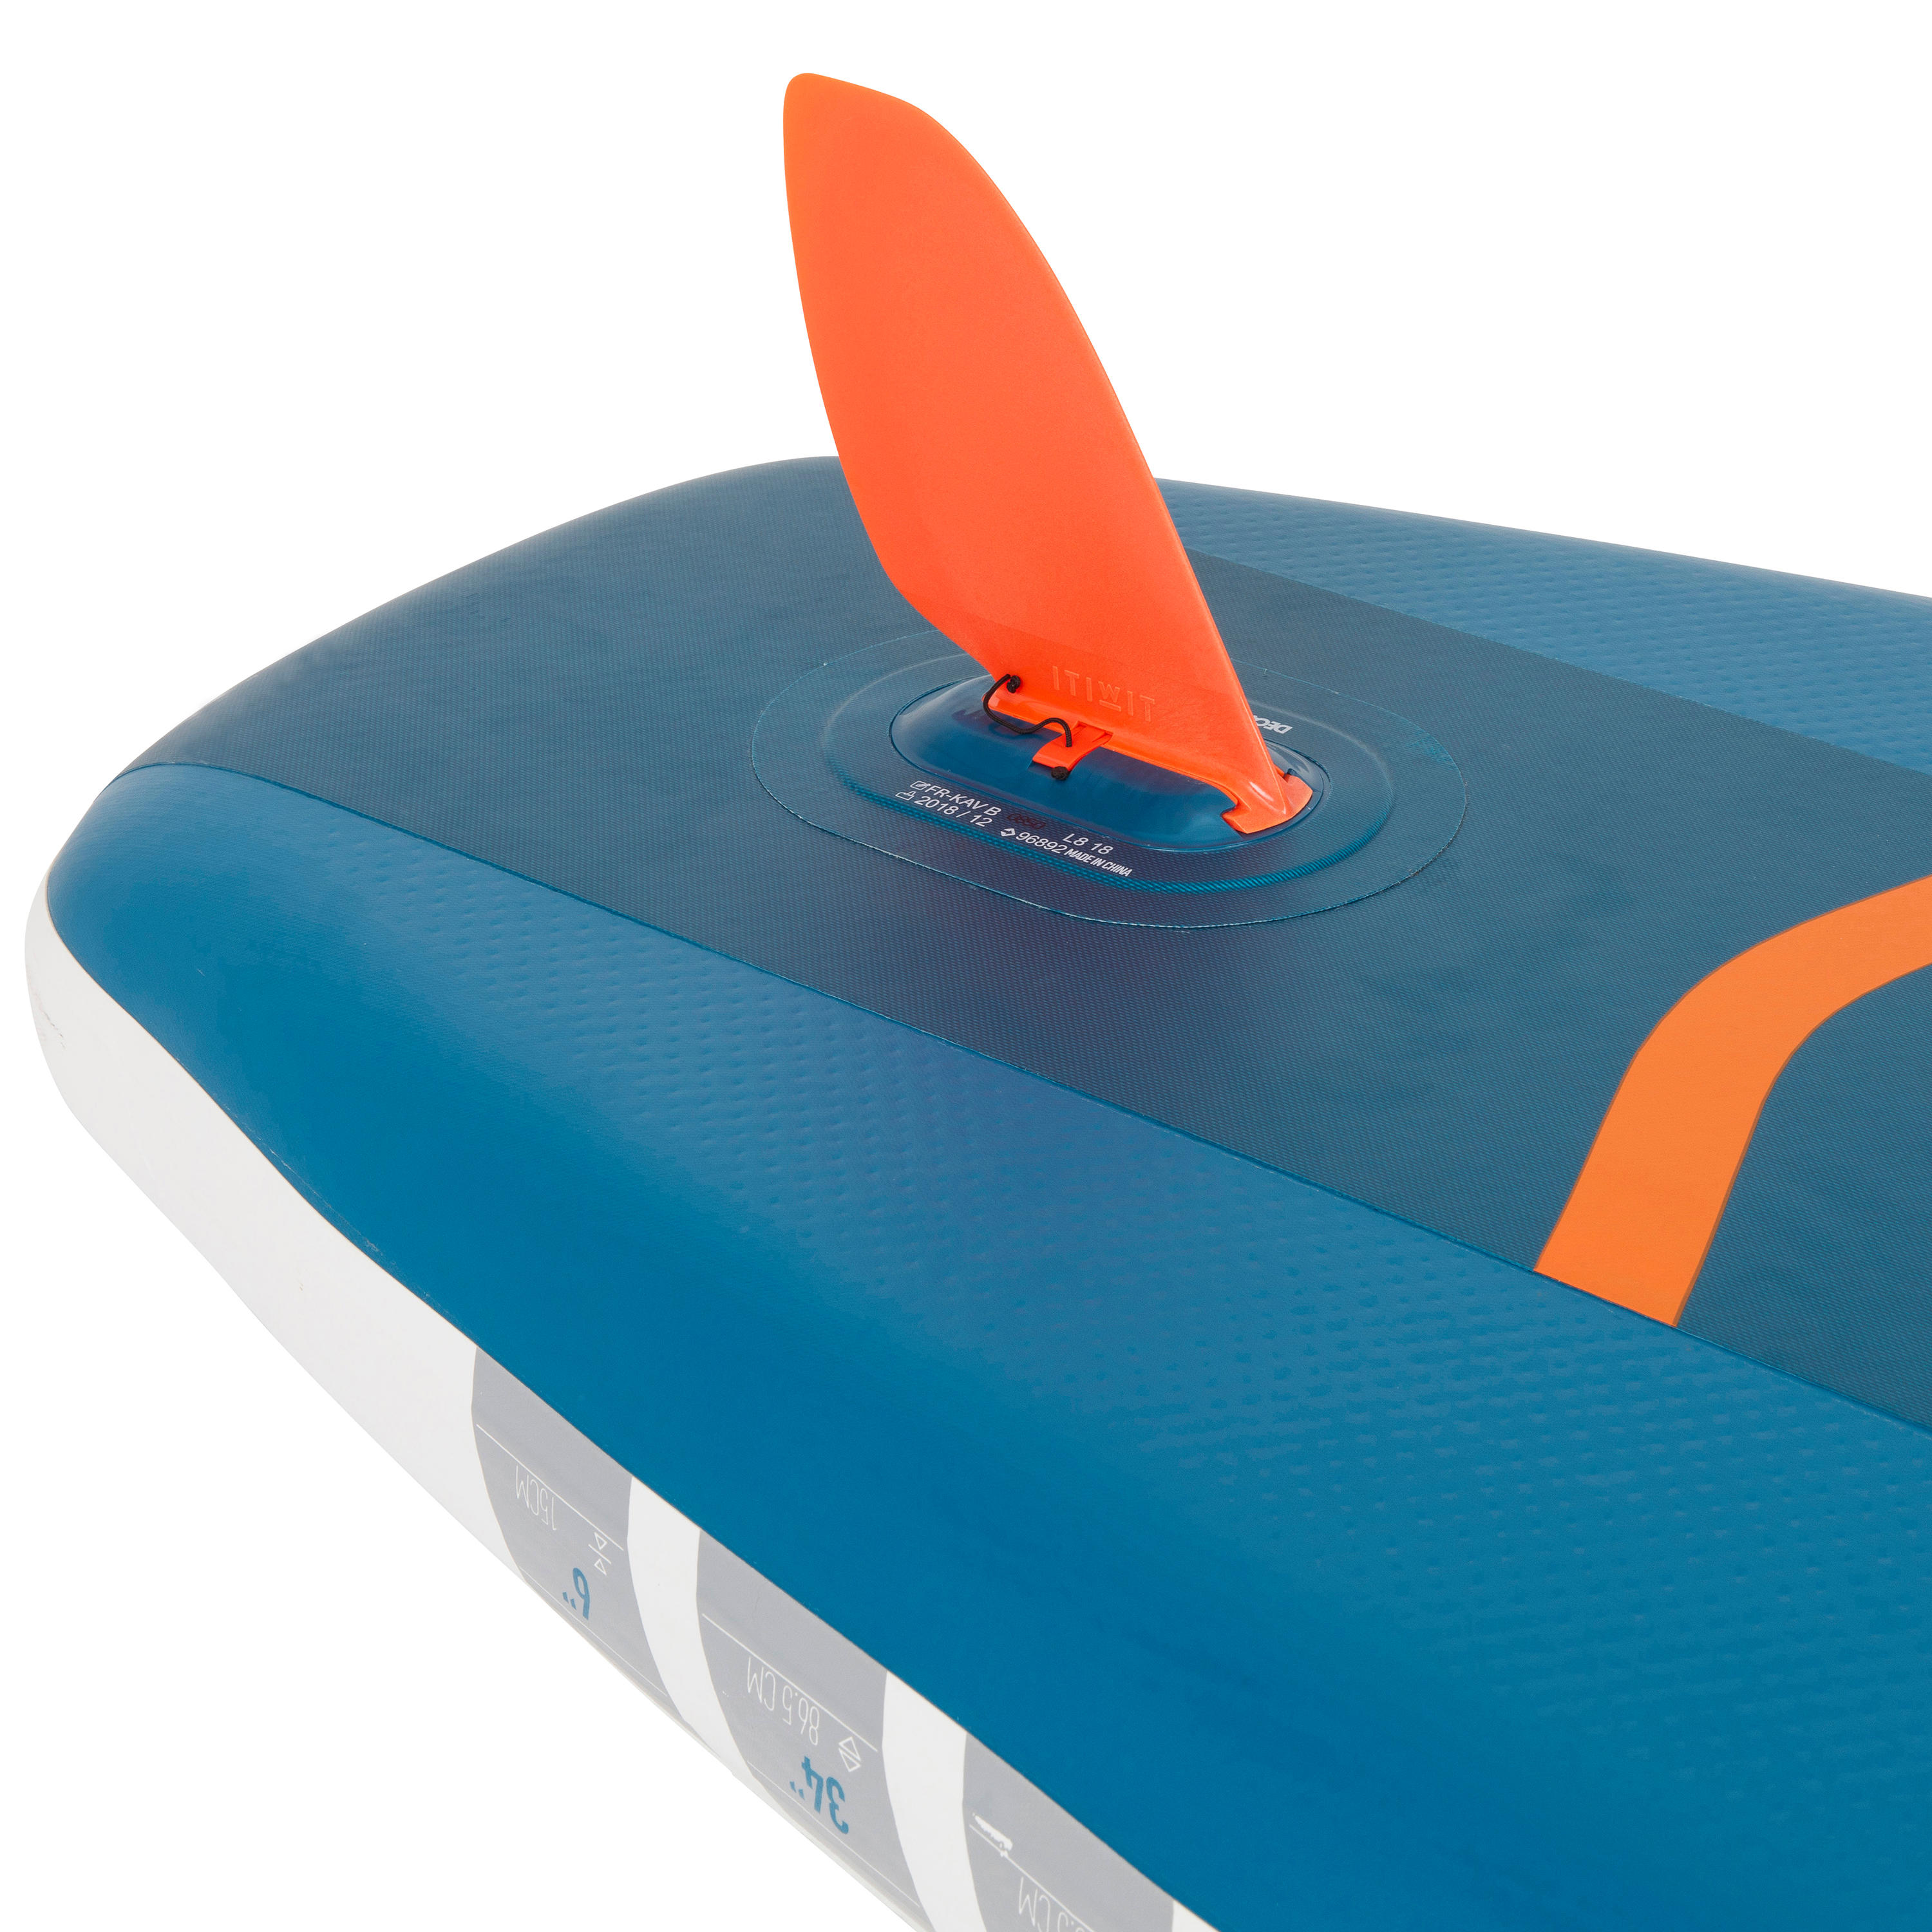 11' Inflatable Paddle Board - X 100 Blue - ITIWIT